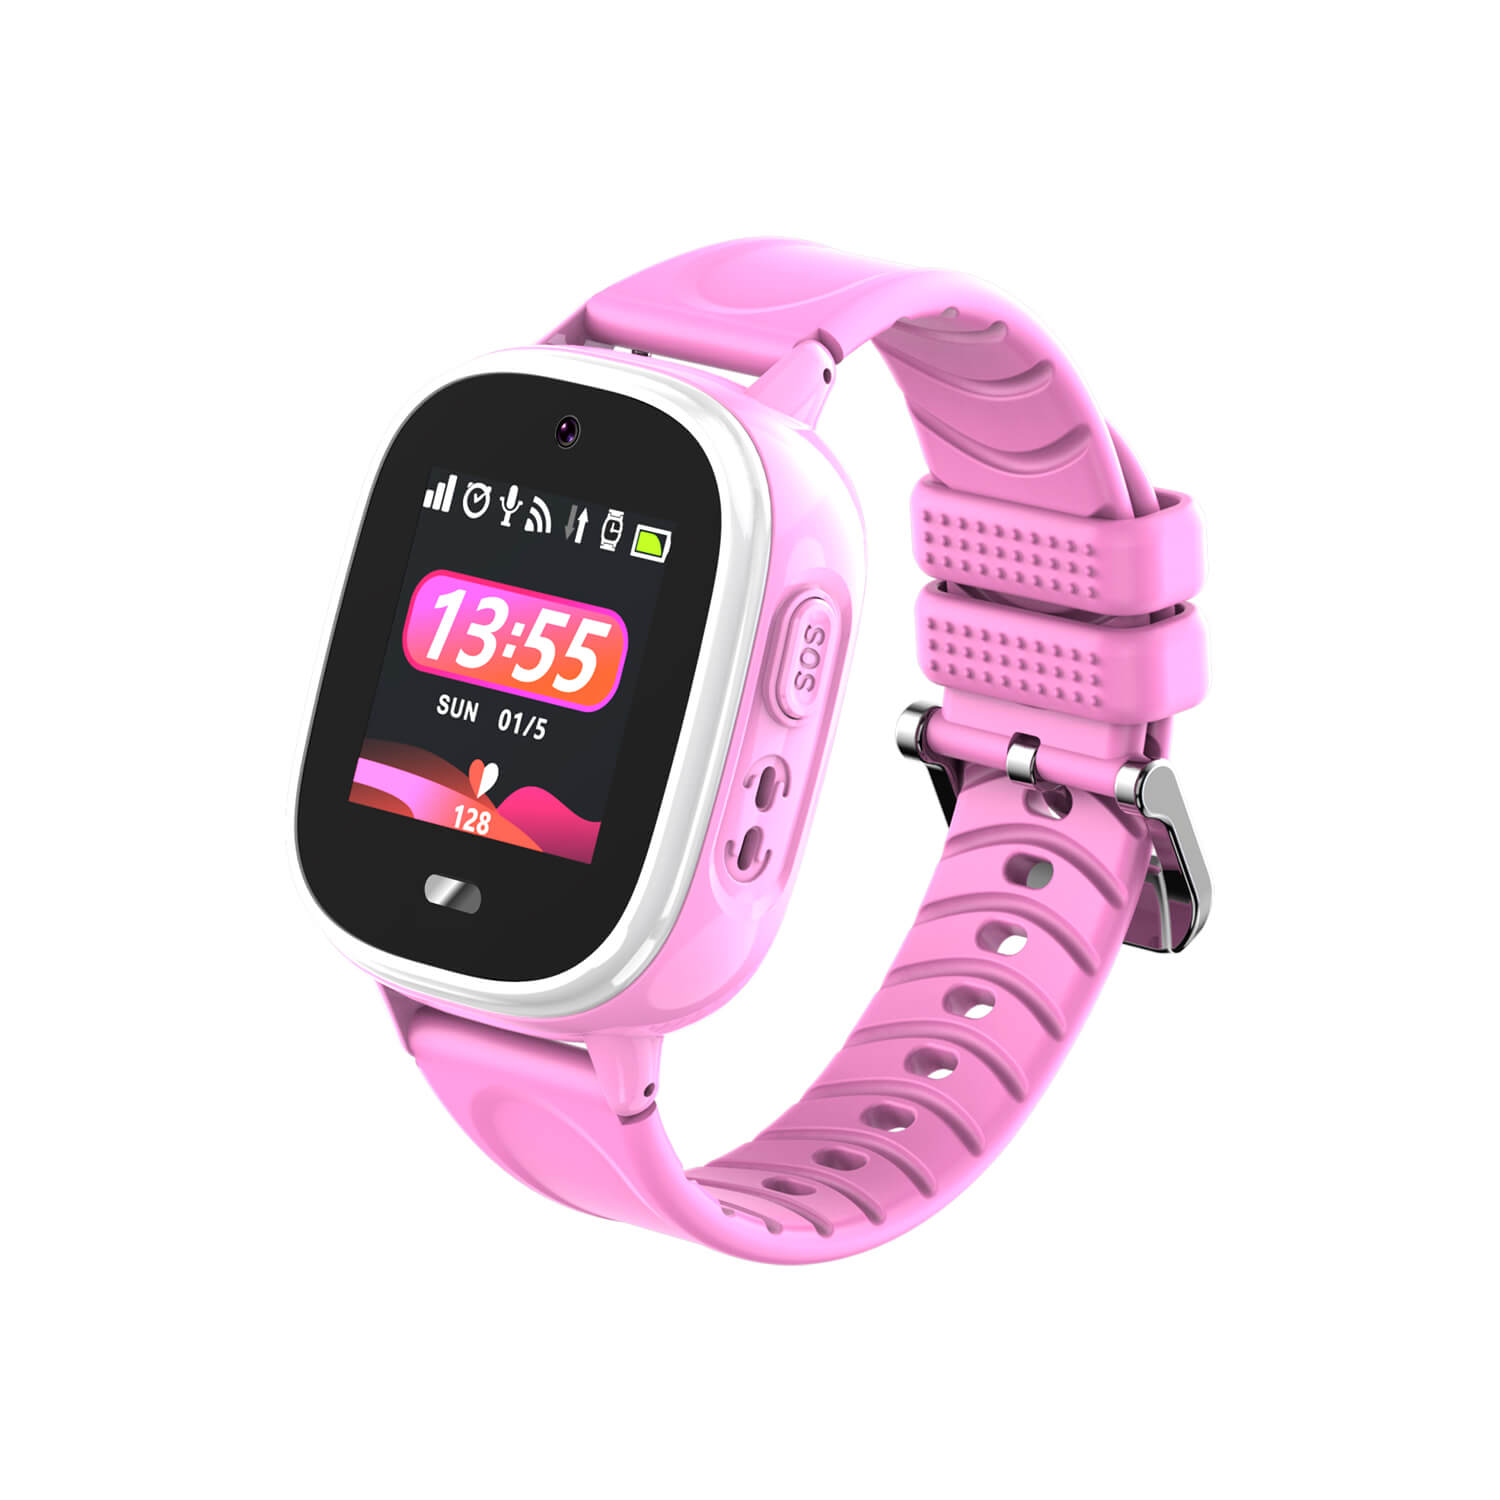 Quality 2G Waterproof Smart Safety Tracker Watch GPS with Removal Alert